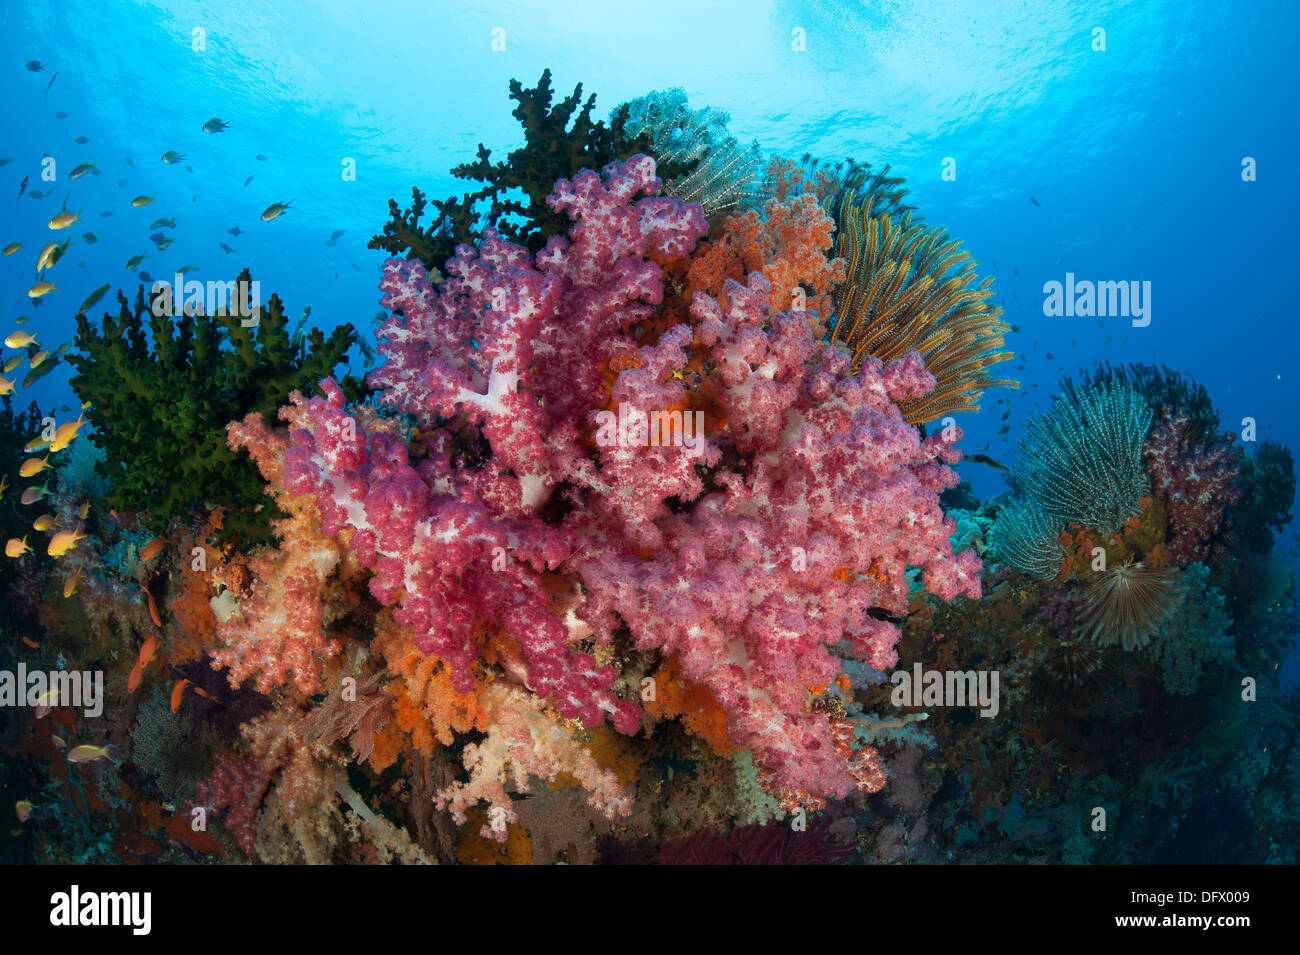 Colorful soft corals (Dendronephthya sp.) adorn the stunning reefs of southern Raja Ampat, West Papua, Indonesia. Stock Photo